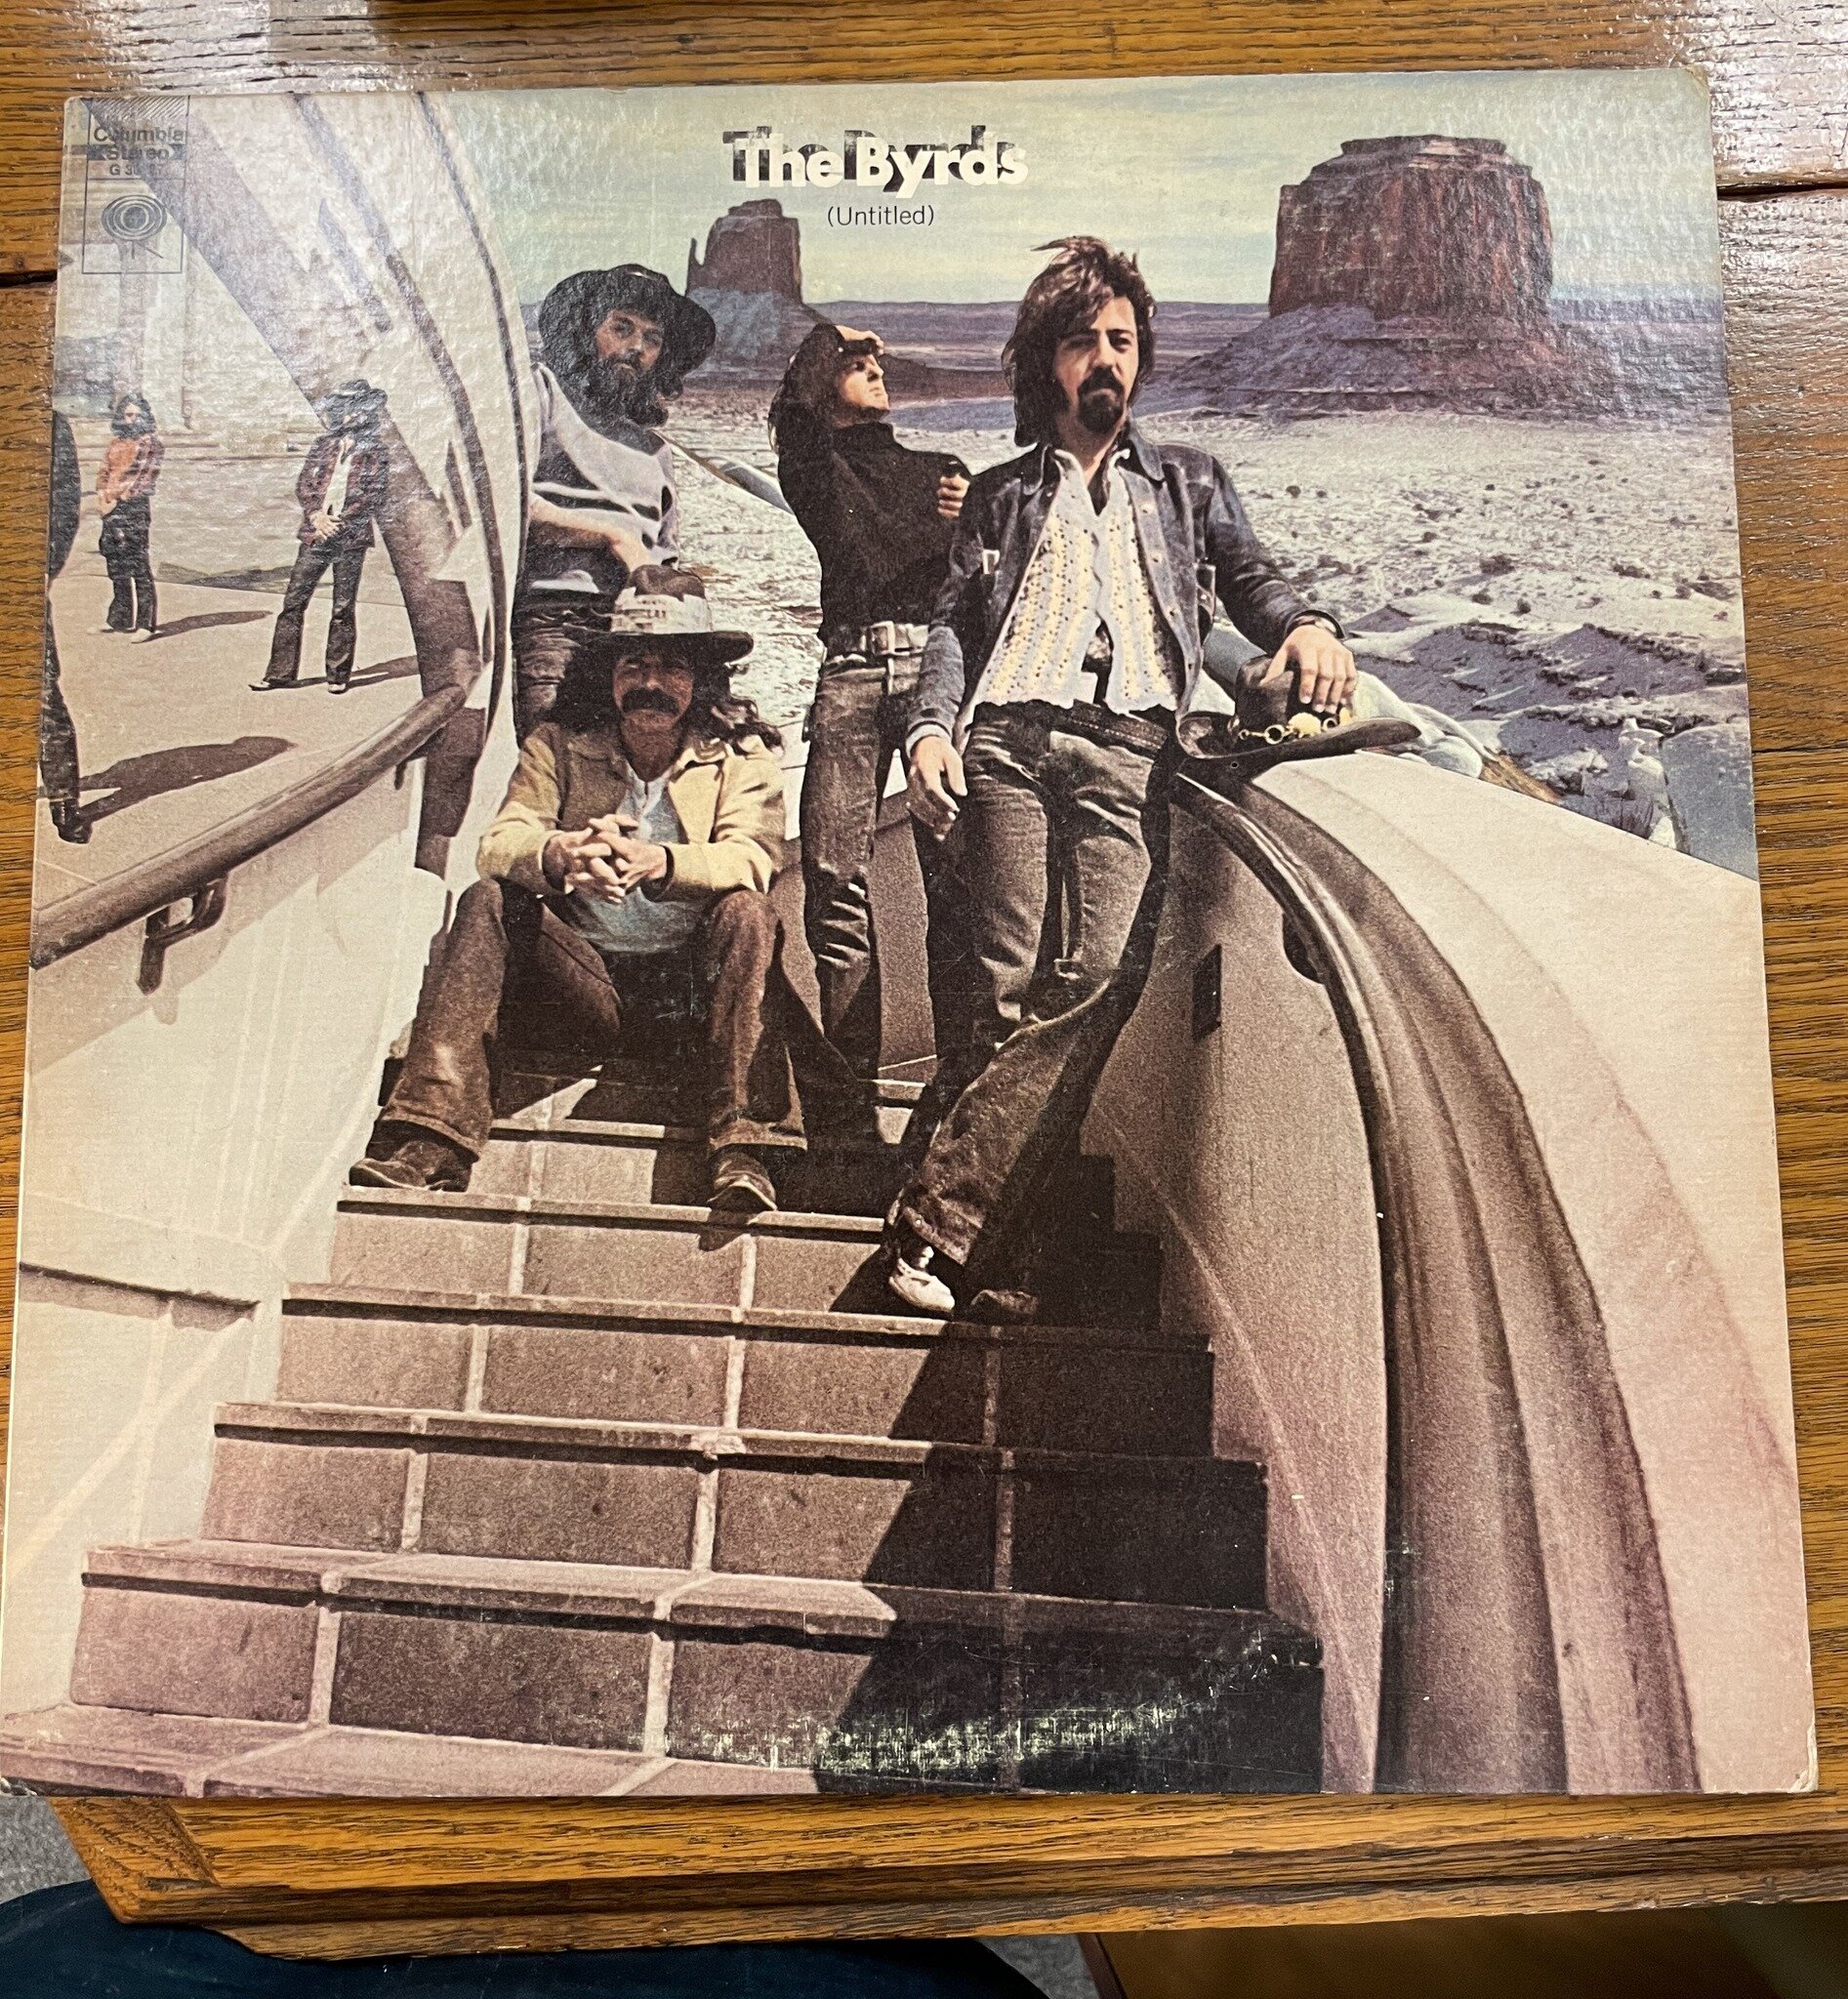 #musicmonday The Byrds! #heretodaymaybetomorrowmaybenot #antiques #decorandmore #vintage #rocantiques #roc #cdga #OMA #ontariomallantiques #vintageliving #vintage #collectibles #vintageny #antiquesnewyork
#rocantiques #vinyl #recordalbums